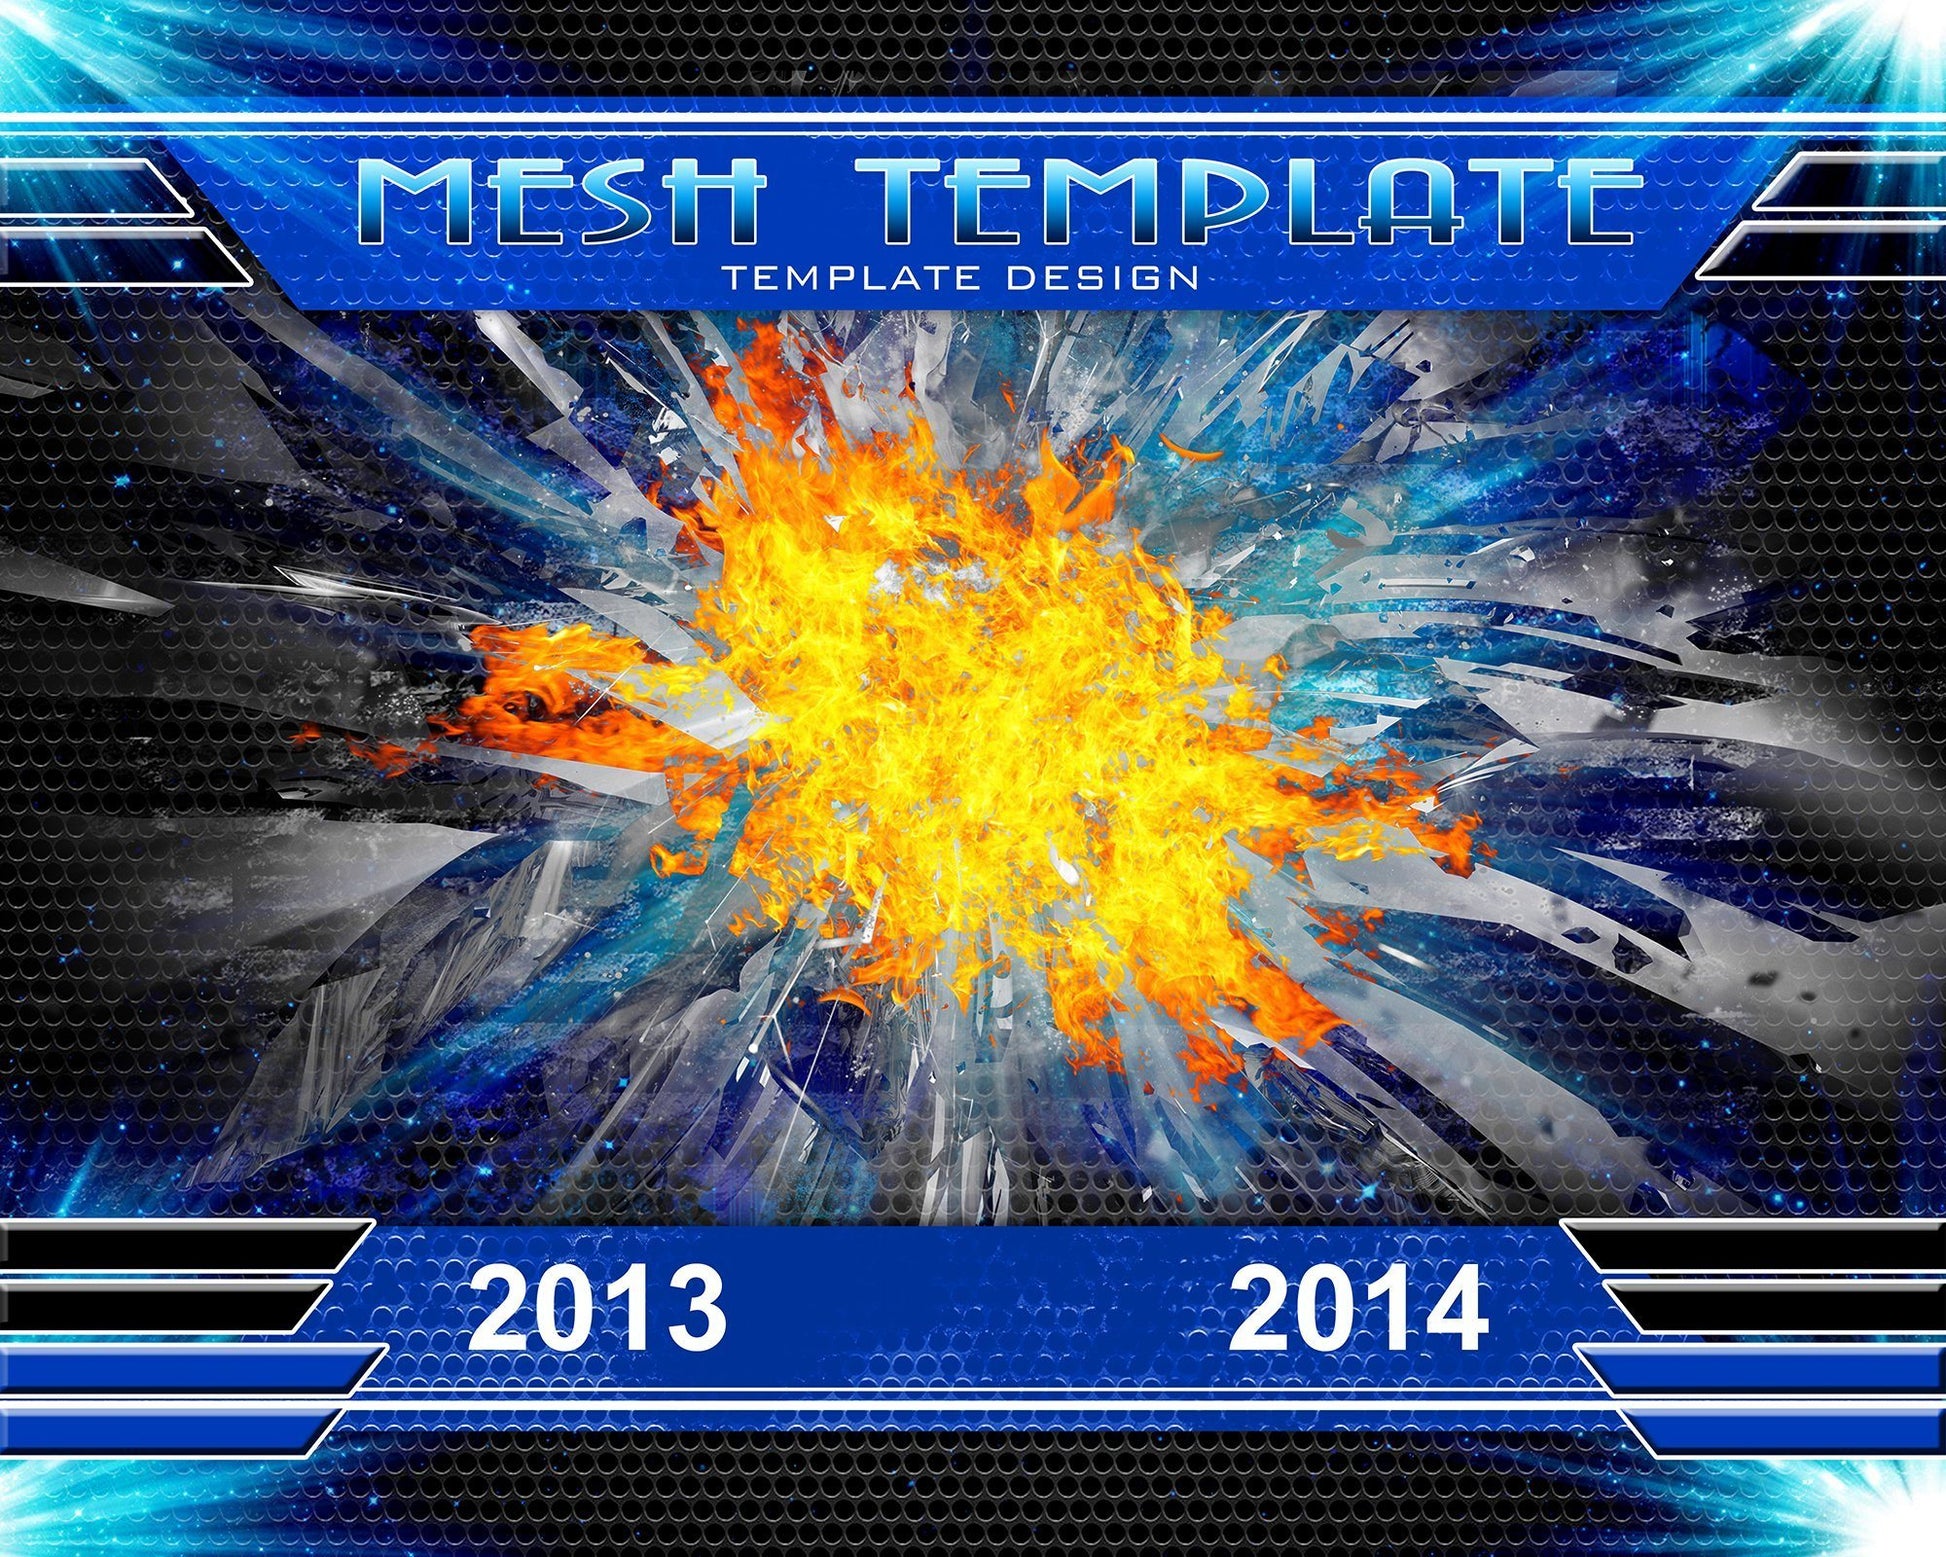 Mesh v.3 - Xtreme Team-Photoshop Template - Photo Solutions